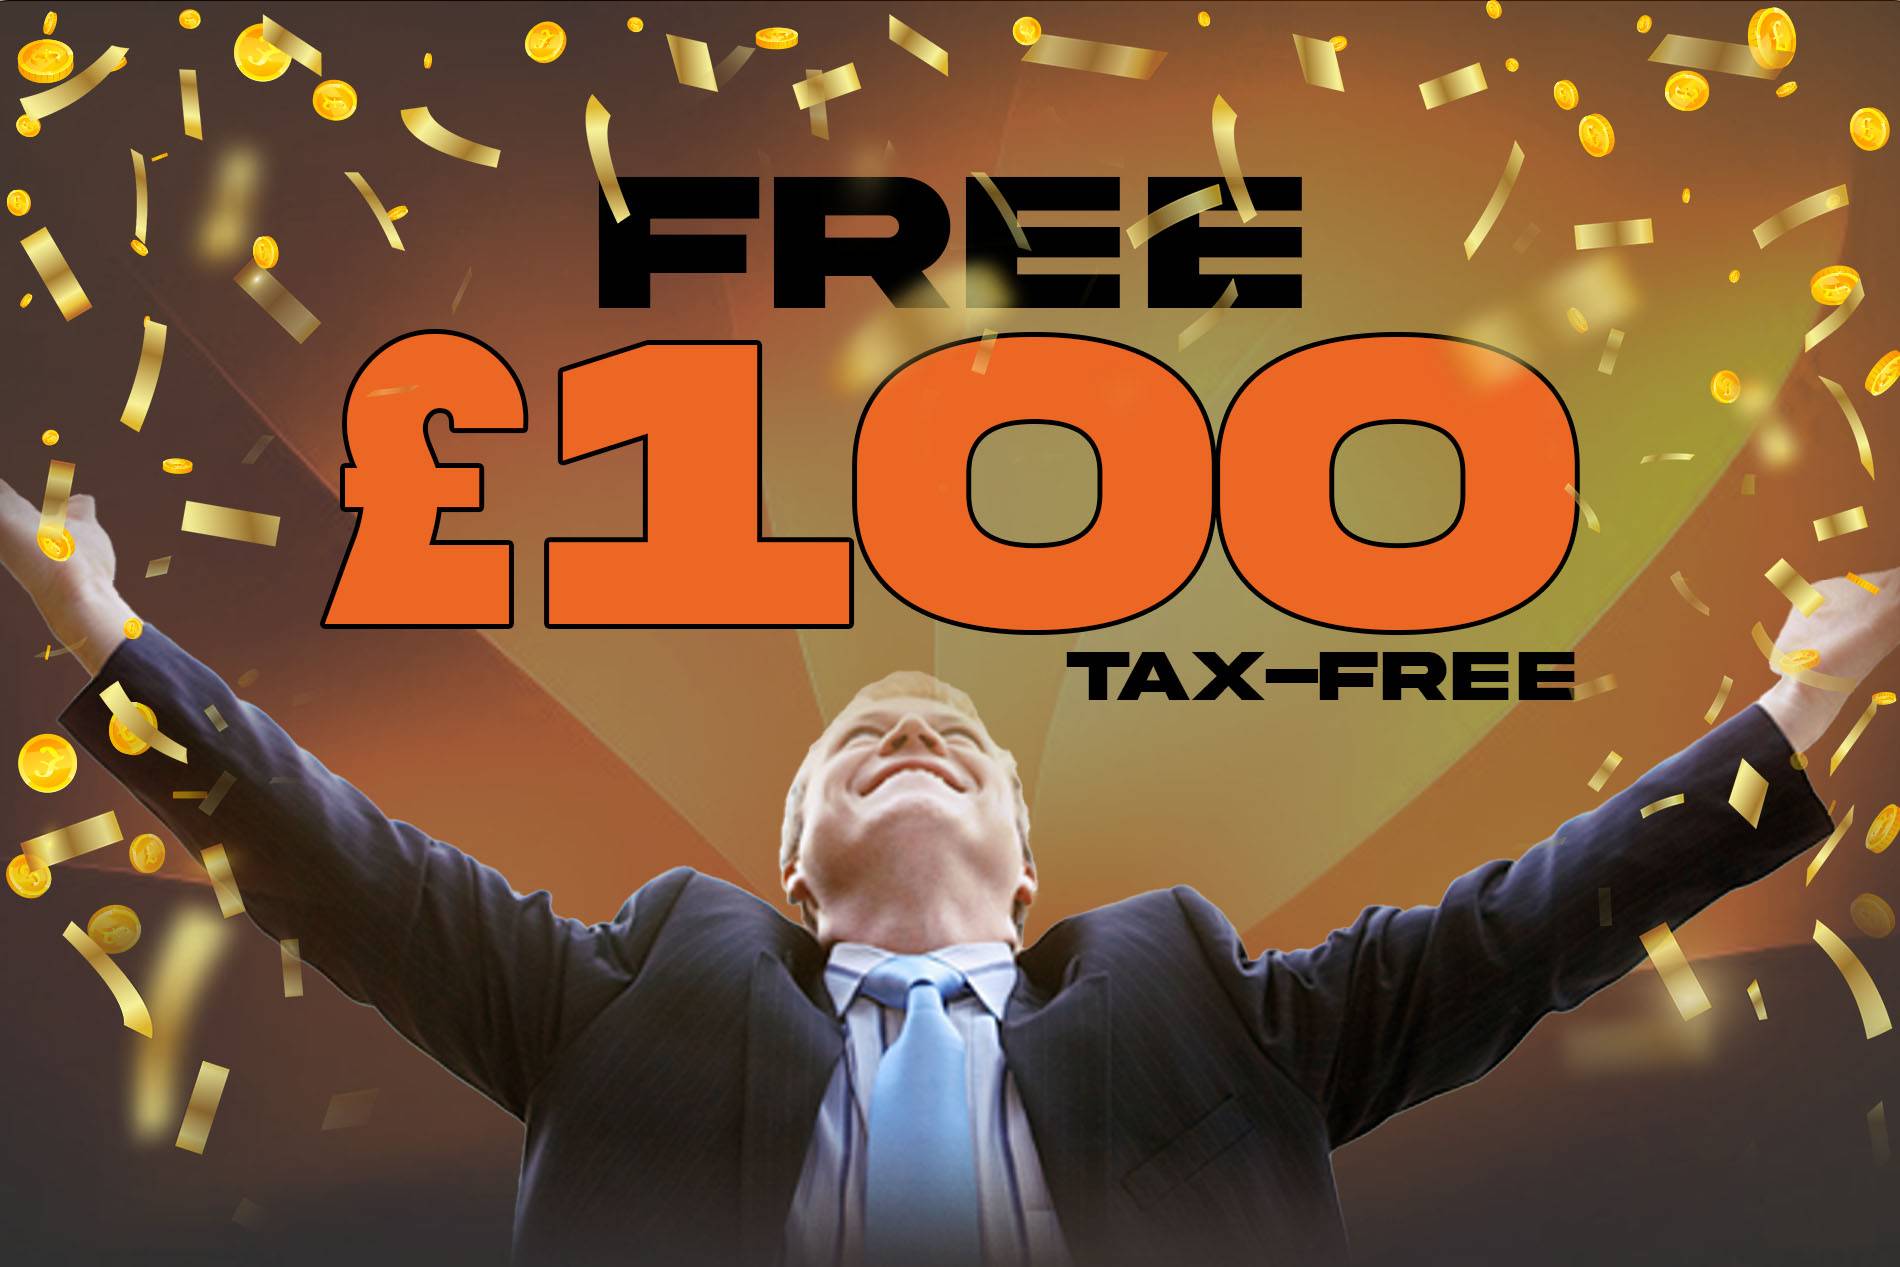 FREE: Chance to Win £100 Tax Free Cash (Spend £1+ and Triple to £300)